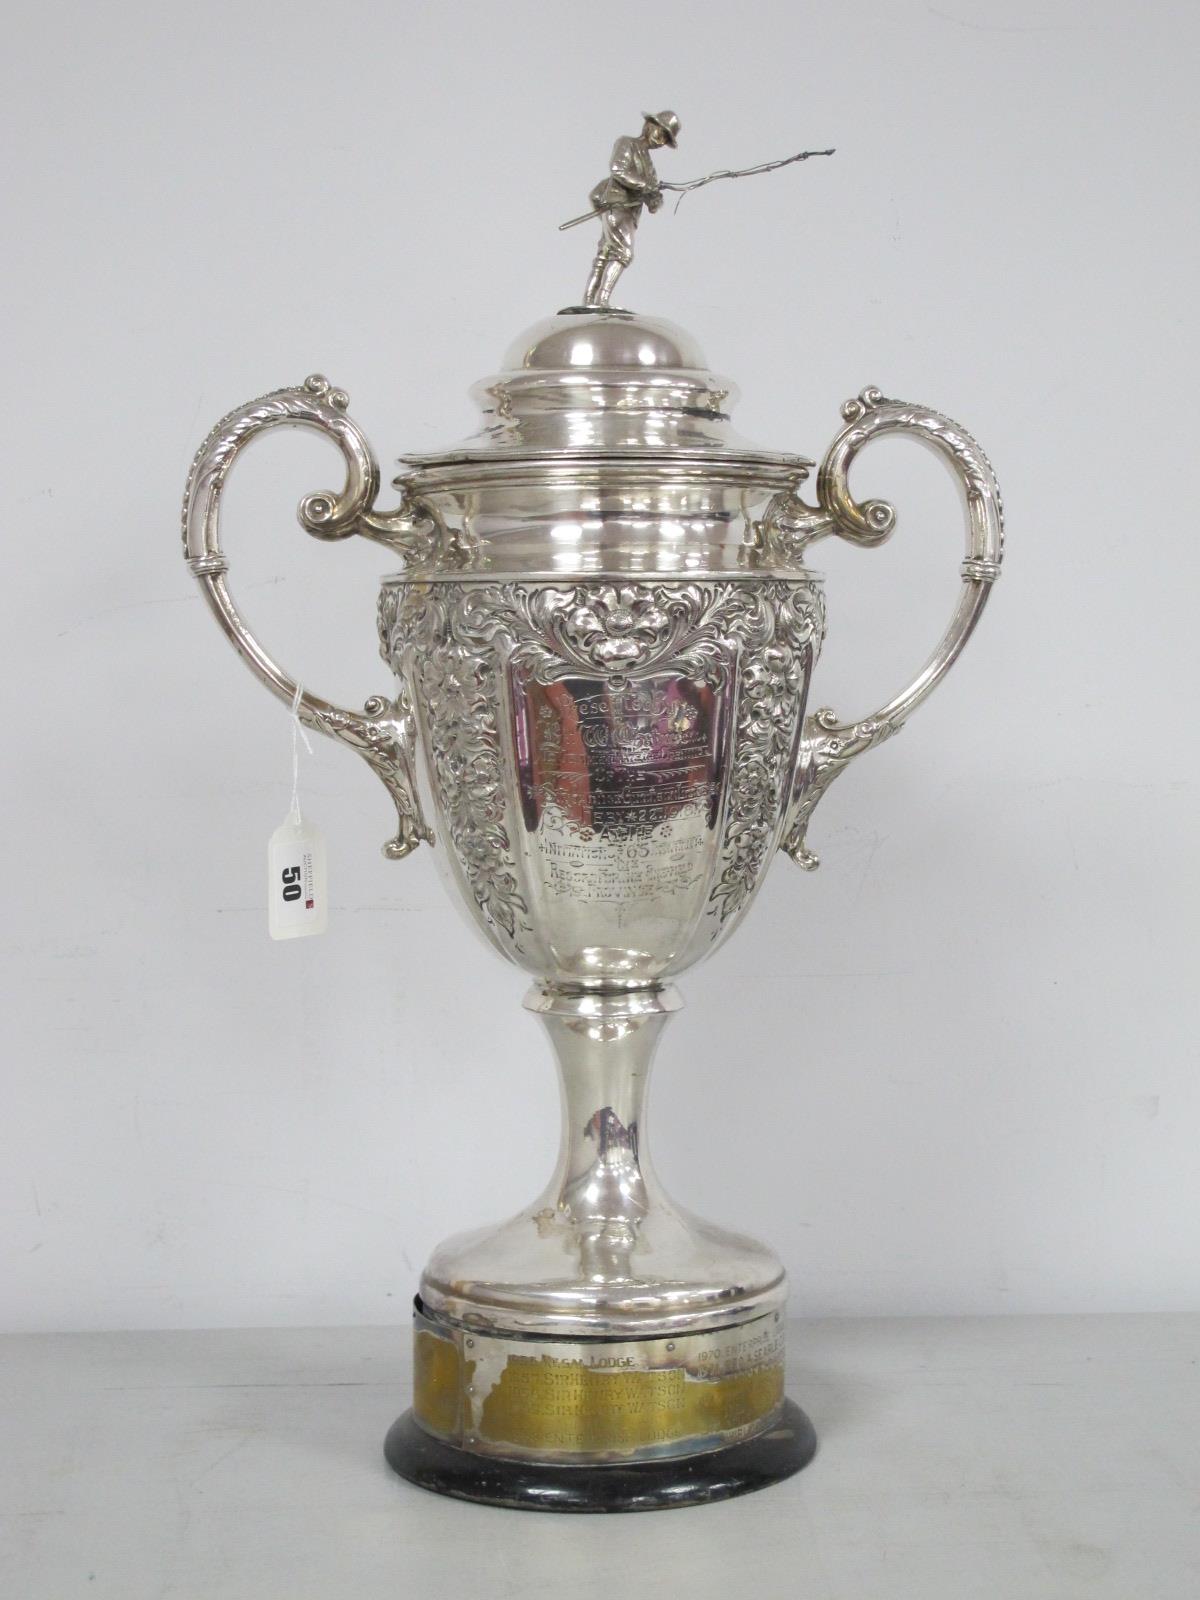 A Large Plated Twin Handled Lidded Pedestal Trophy Cup, inscribed "R.A.O.B. GLE Sir George